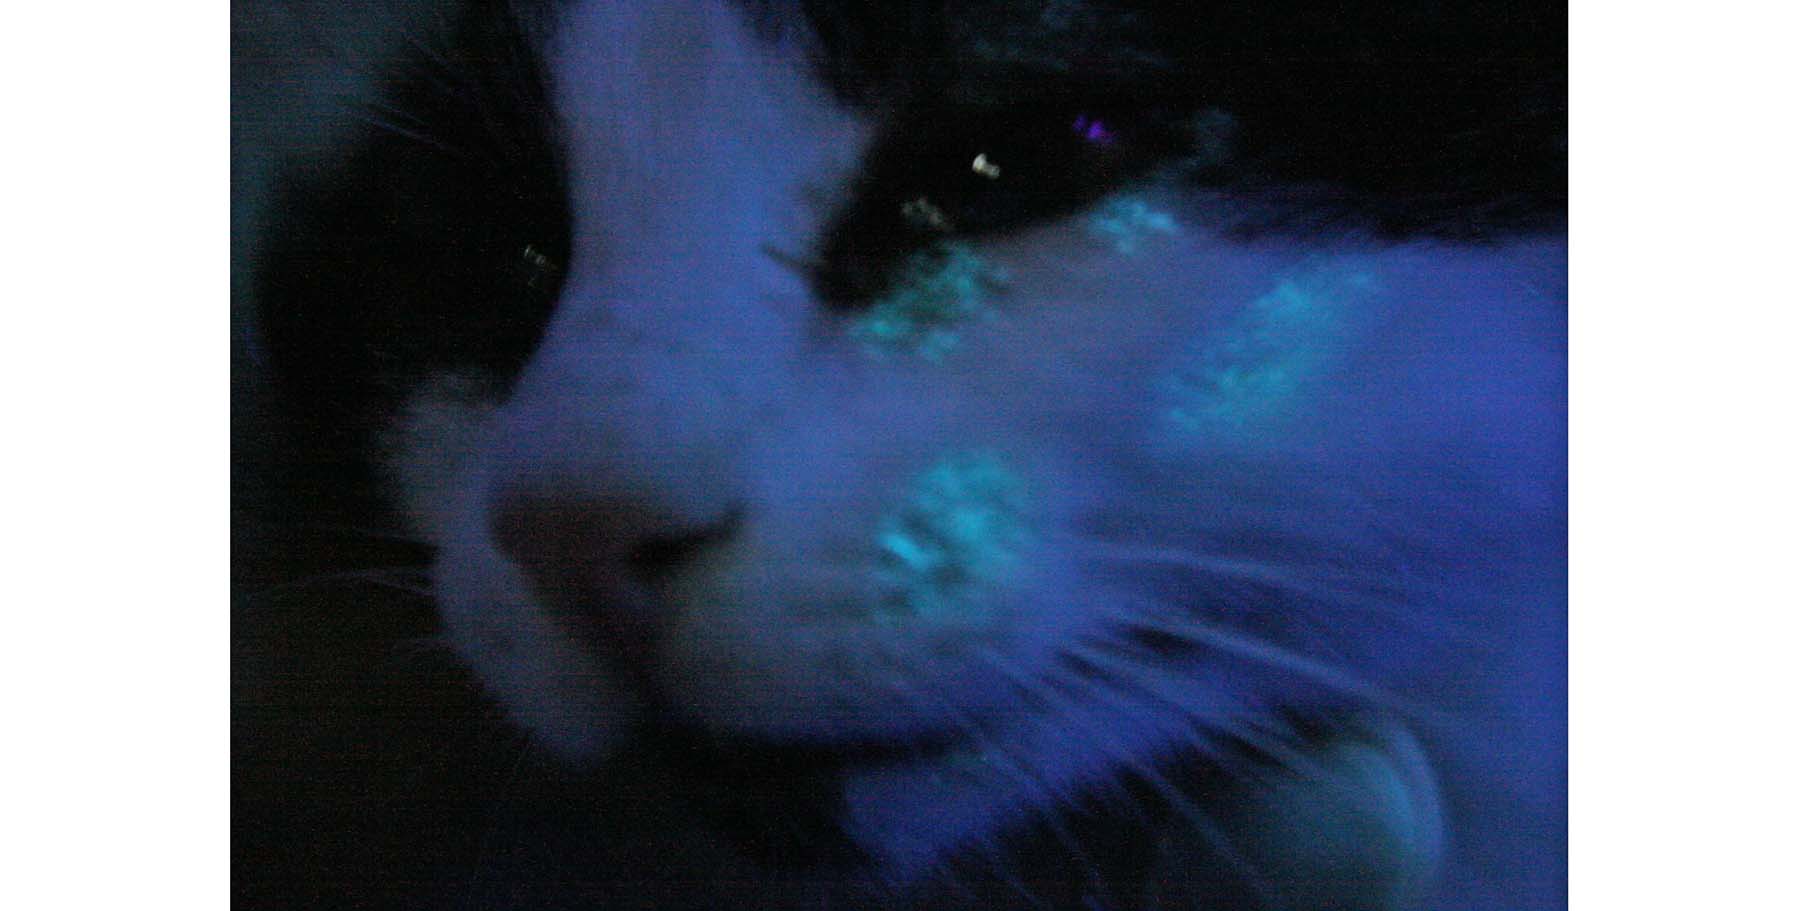 Feline Dermatophytosis (‘Ringworm'): Fluorescing hairs infected with Microsporum canis Fungus, adult Cat